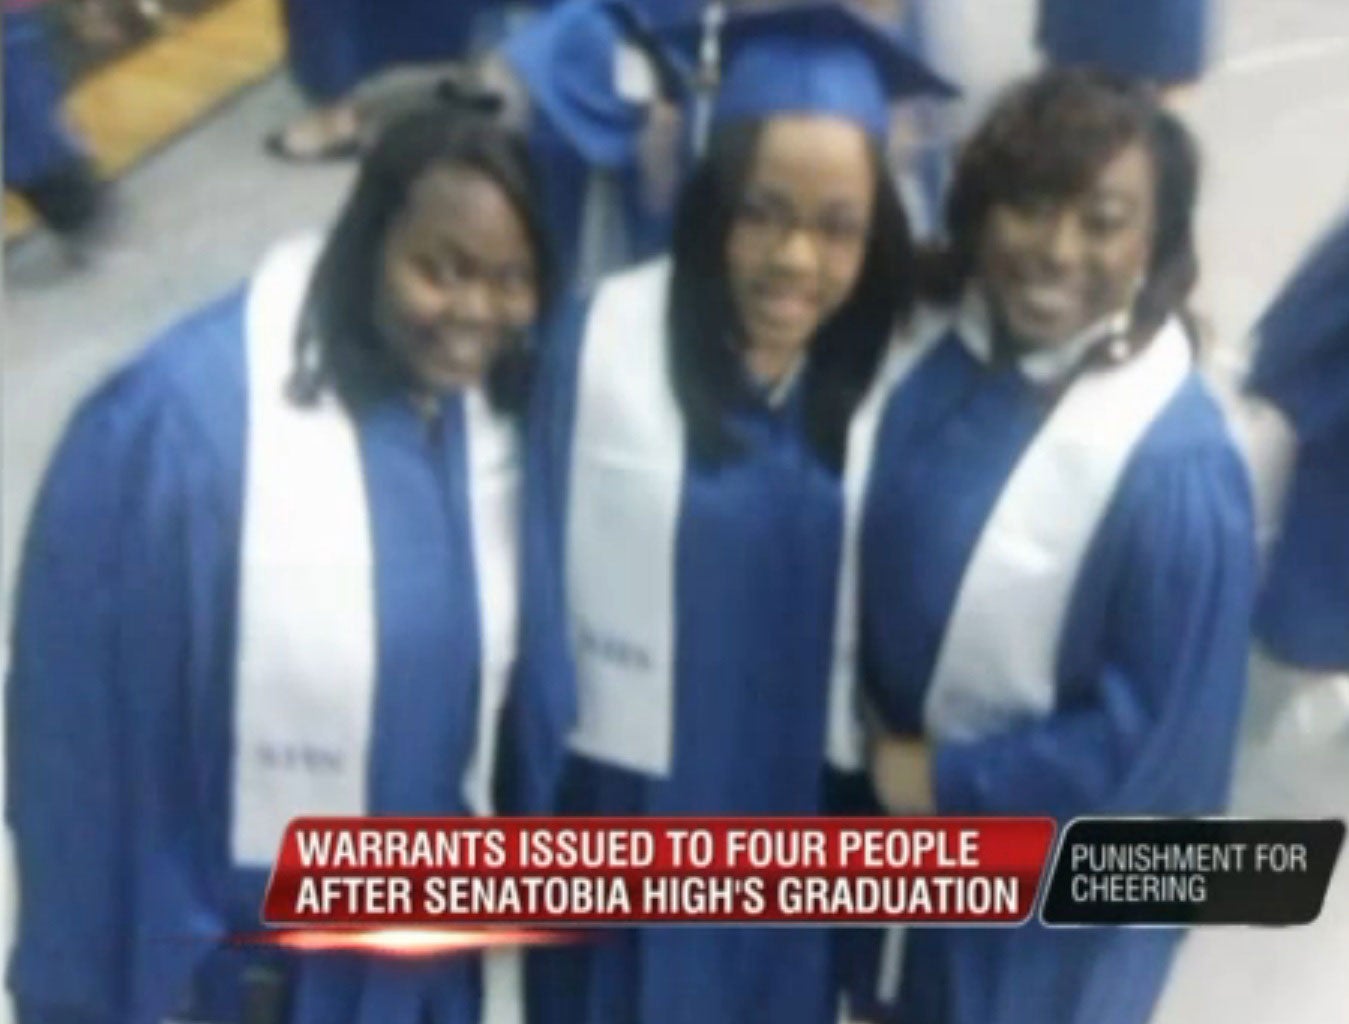 The family were attending a high school graduation when they were reportedly ejected